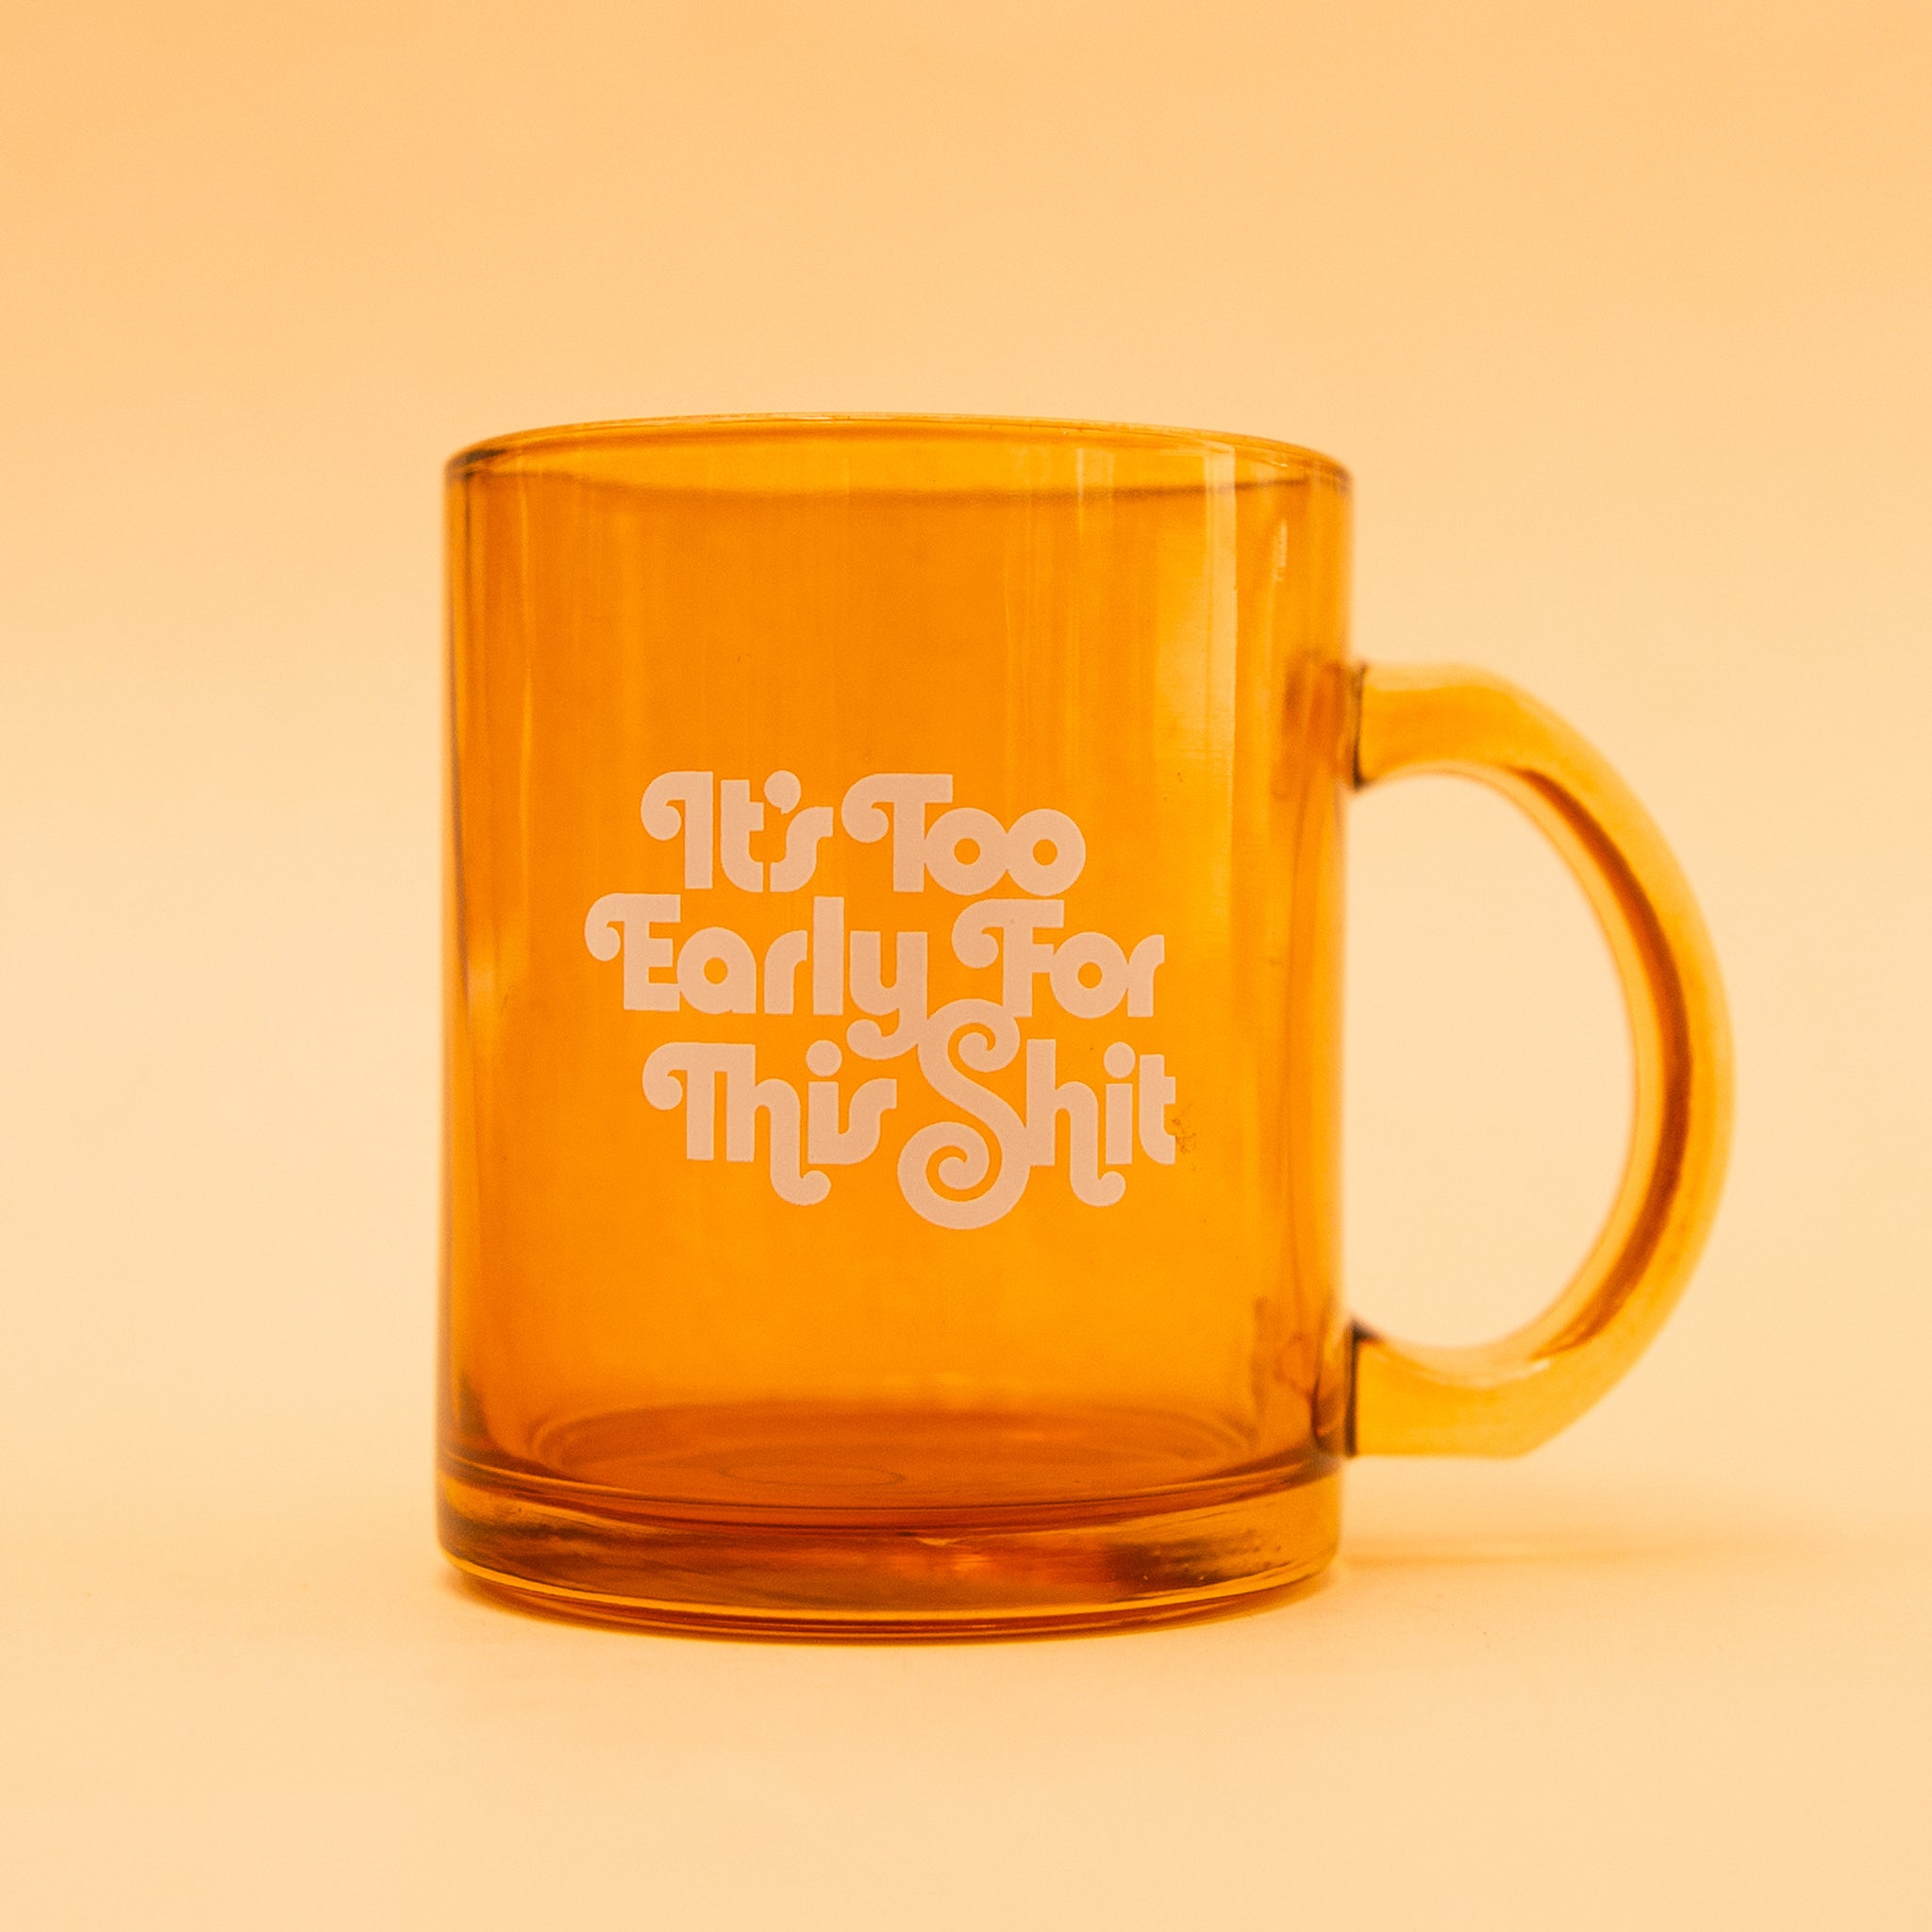 On a yellow background is an orange glass mug with text that reads, "It's Too Early For This Shit". 